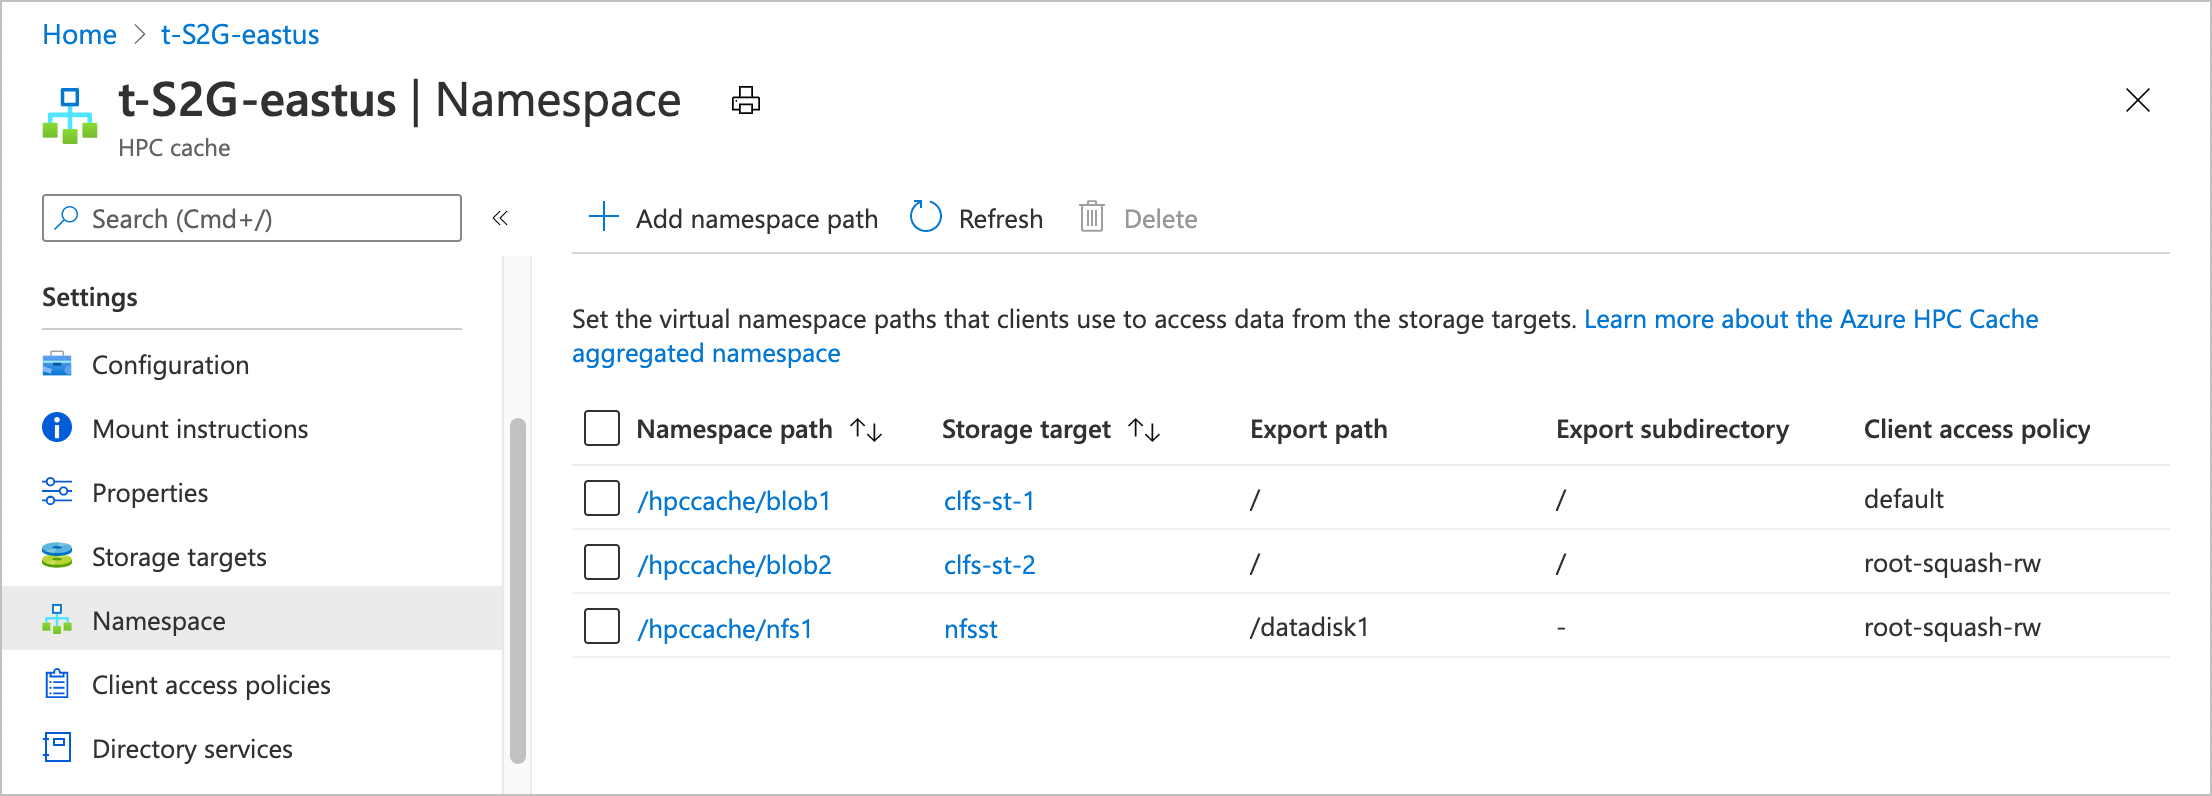 screenshot of portal namespace page with two paths in a table. Column headers: Namespace path, Storage target, Export path, and Export subdirectory, and Client access policy. The path names in the first column are clickable links. Top buttons: Add namespace path, refresh, delete